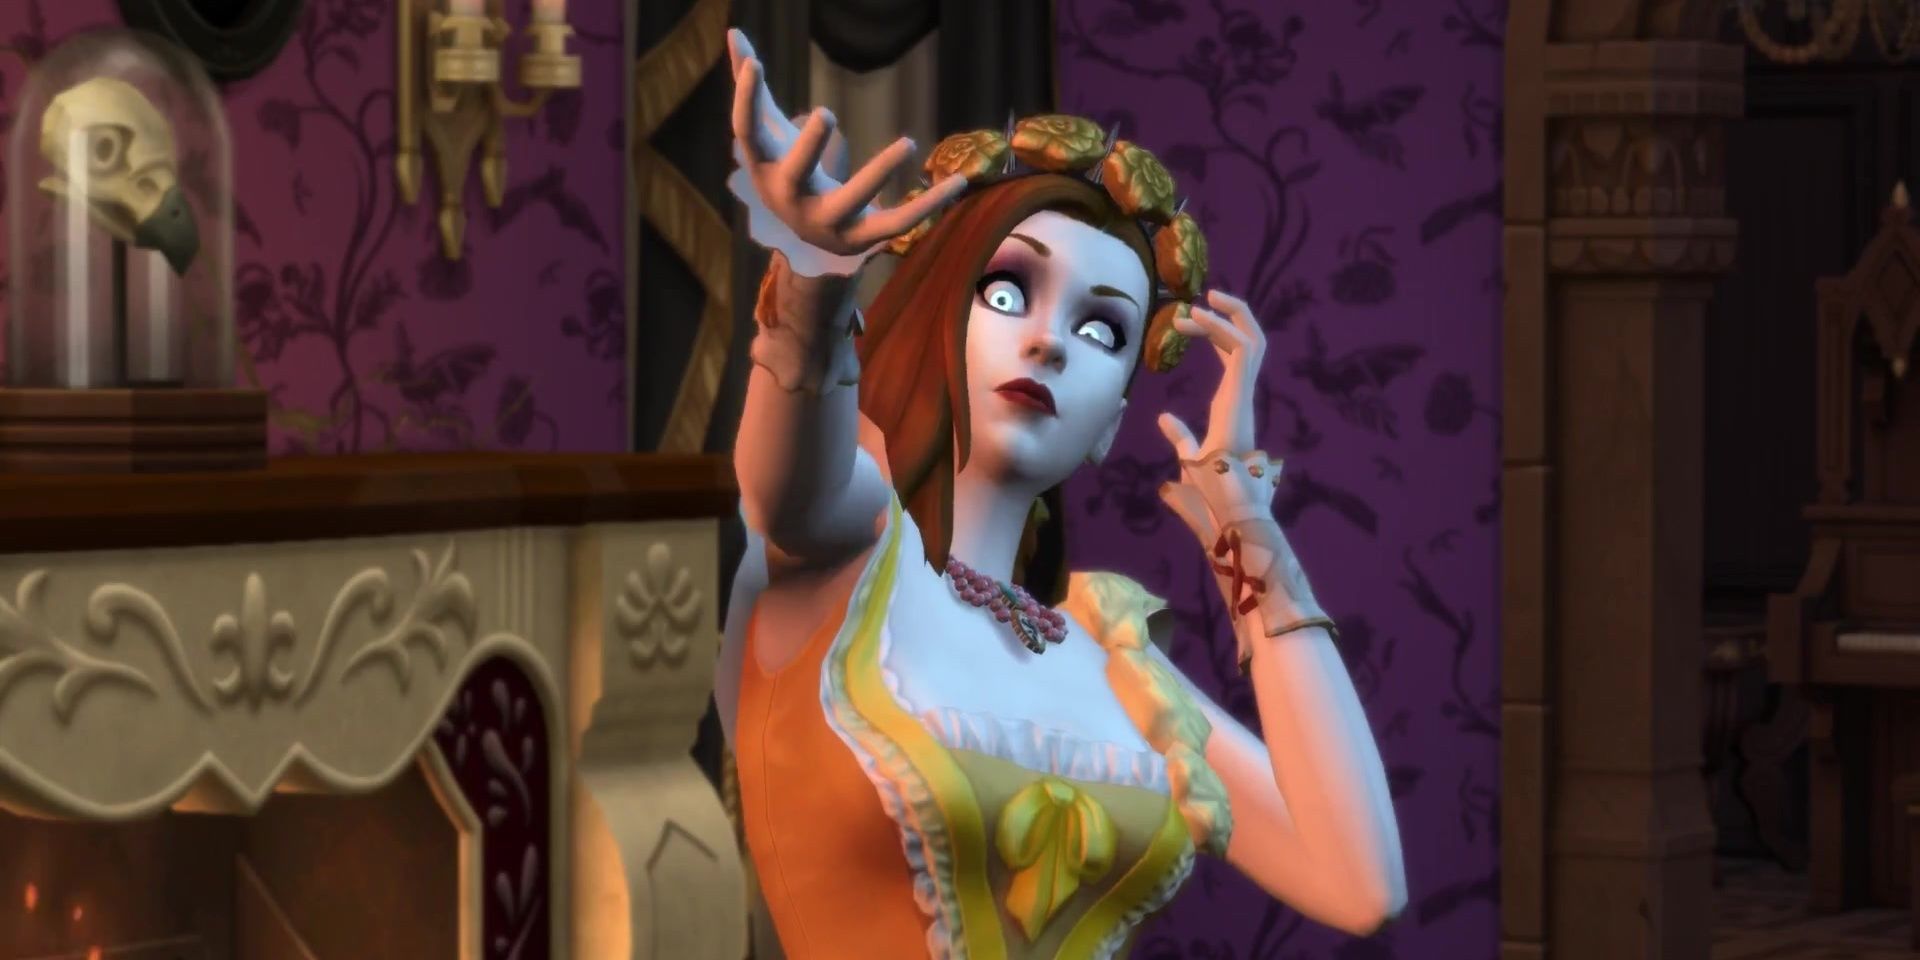 A vampiric Sim appears to be casting some sort of spell—or at least, preparing to cast something